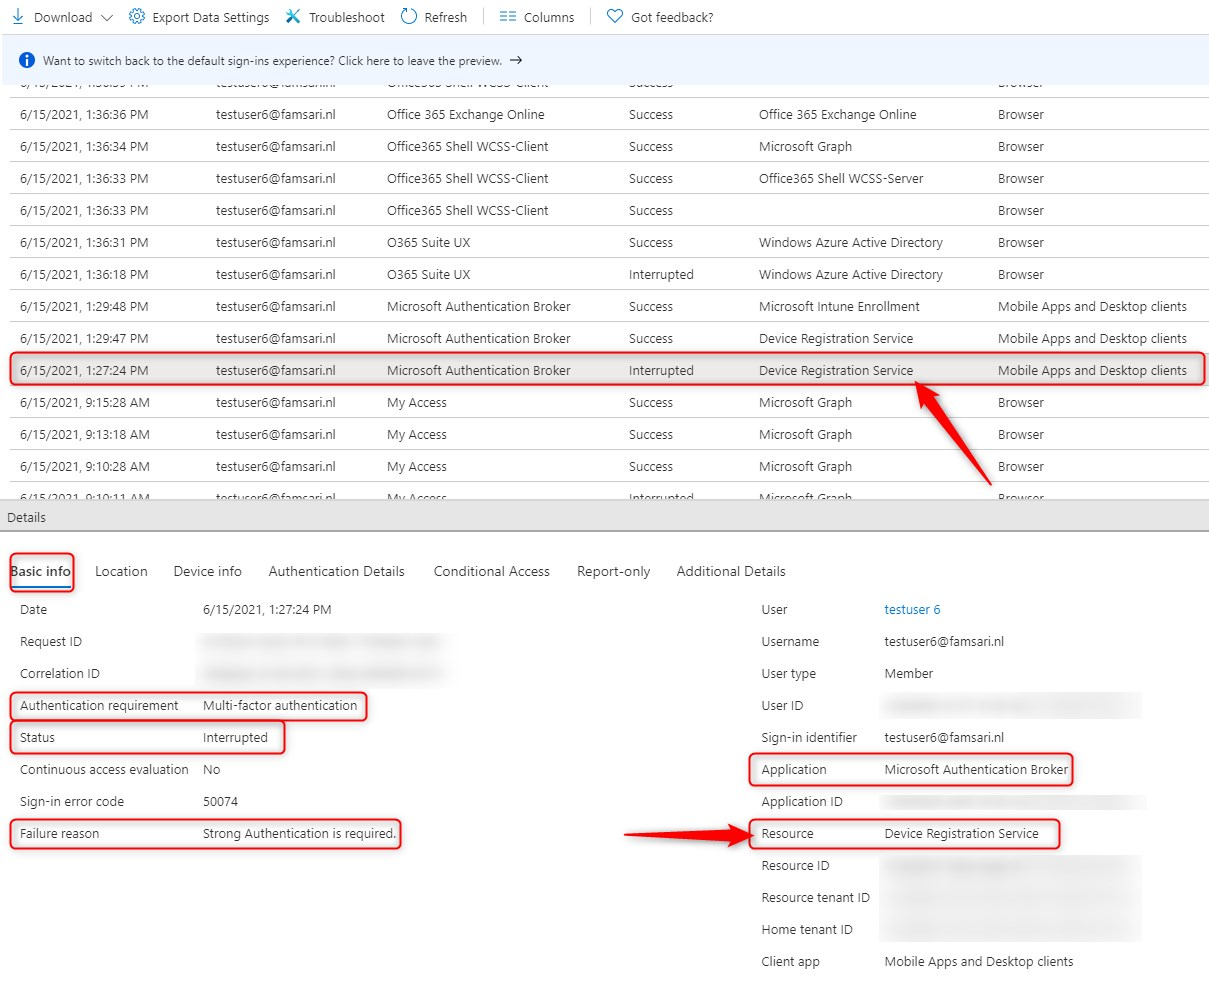 Azure AD sign-in logs - Basic Info